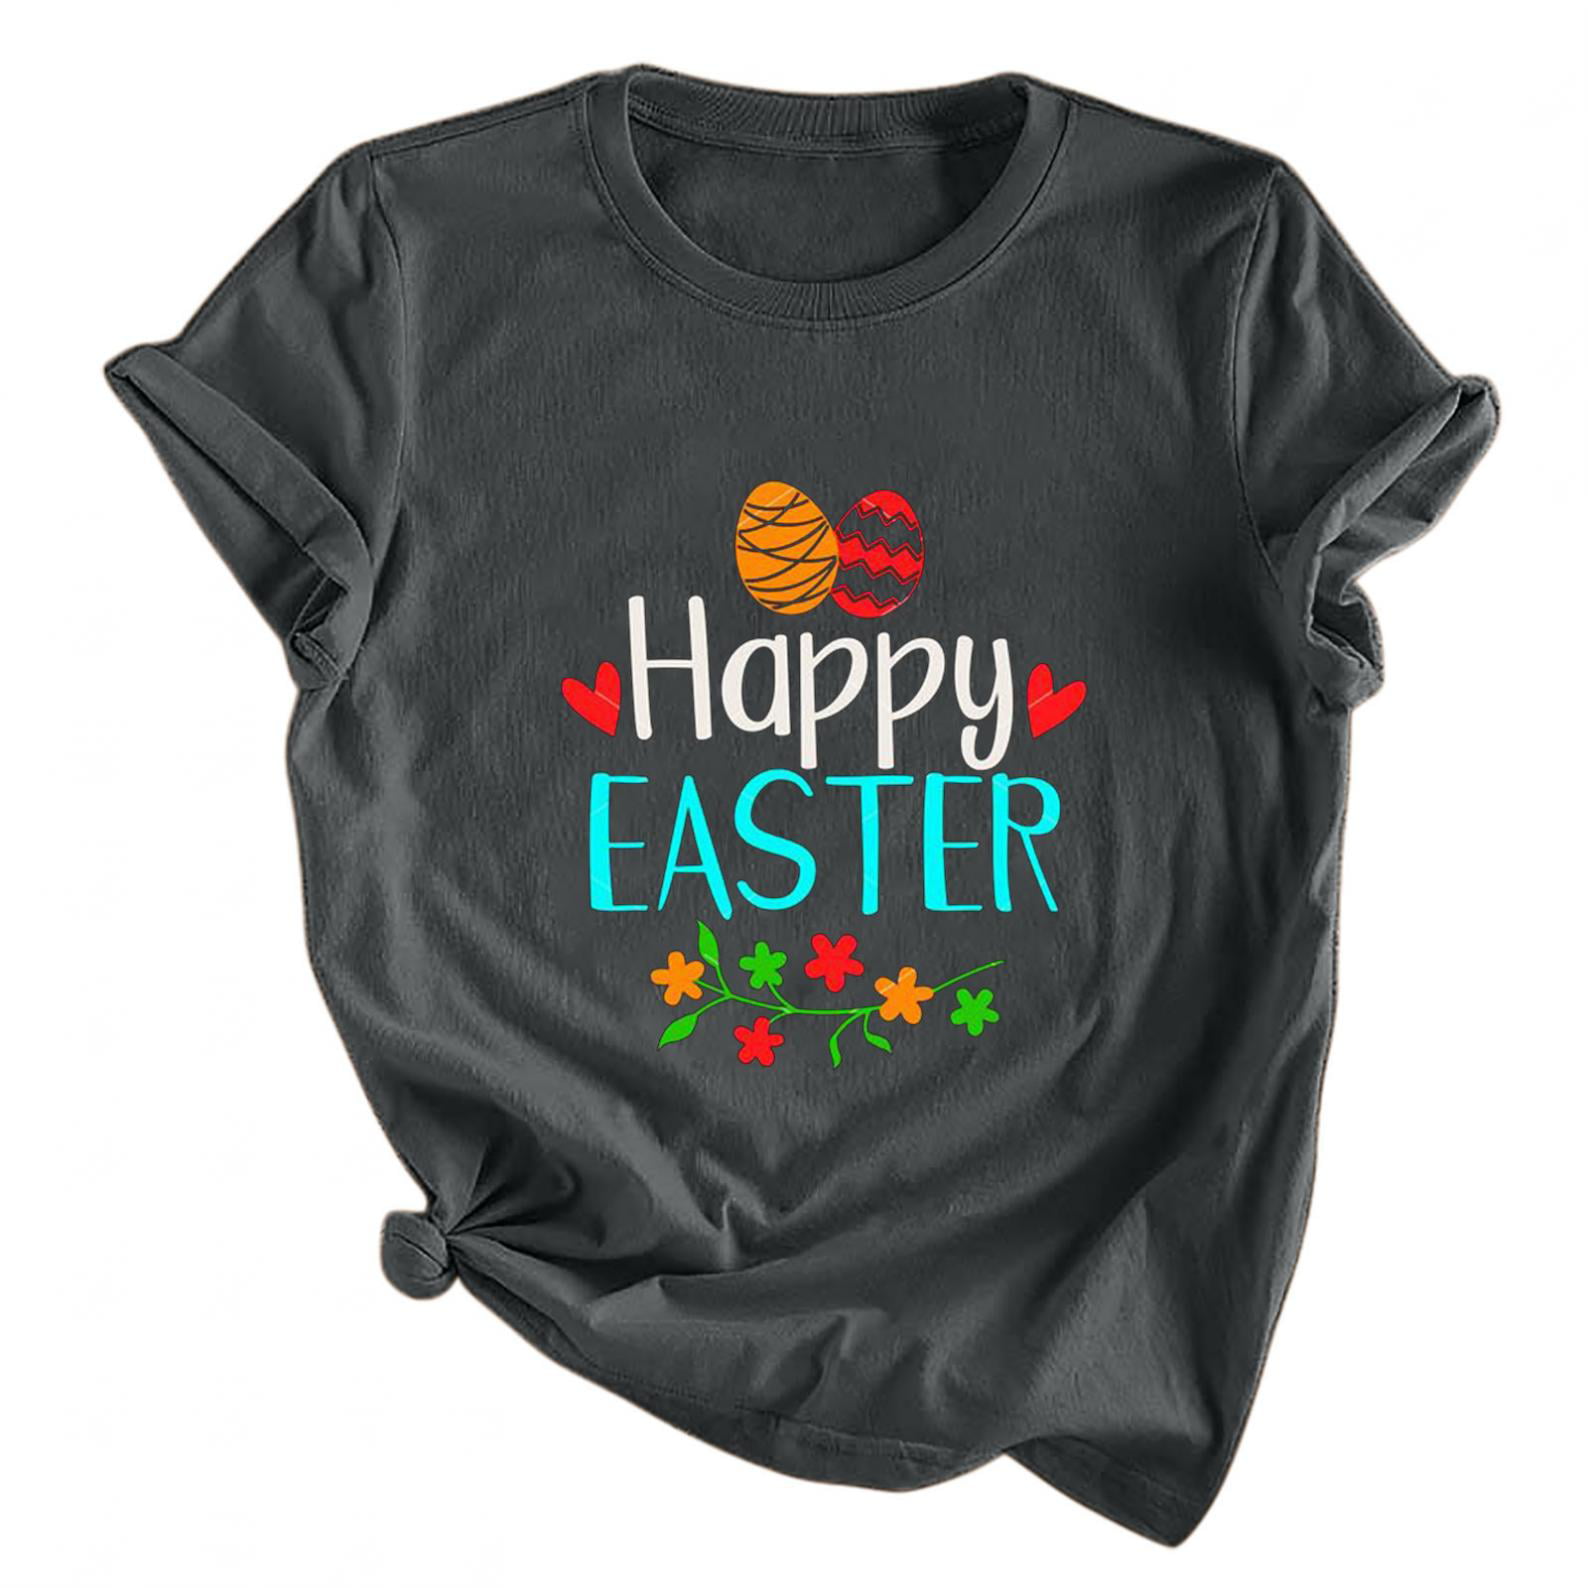 Happy Easter Tshirt/Womens Shirt/Easter Shirt/Gifts For Her/Bleached Shirt/Sublimation Tshirt